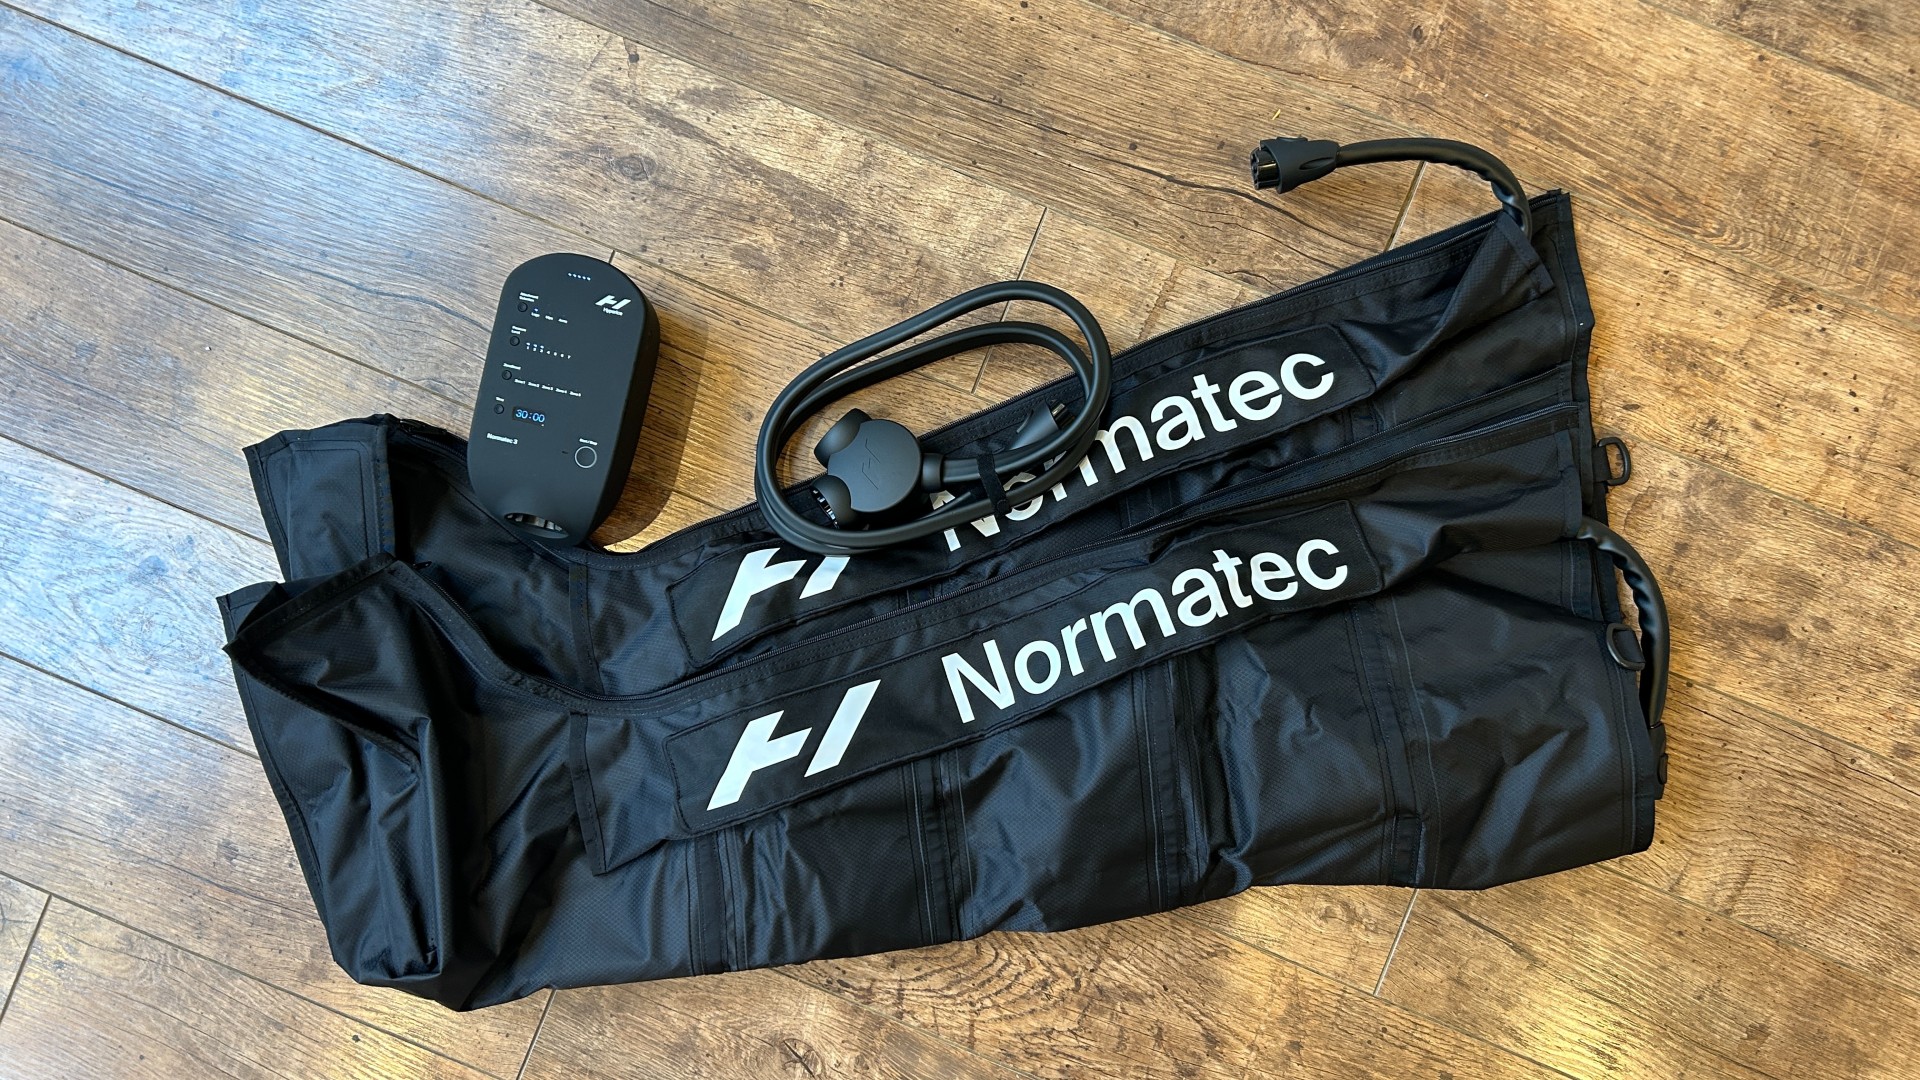 Normatec 3 Compression Boot Review